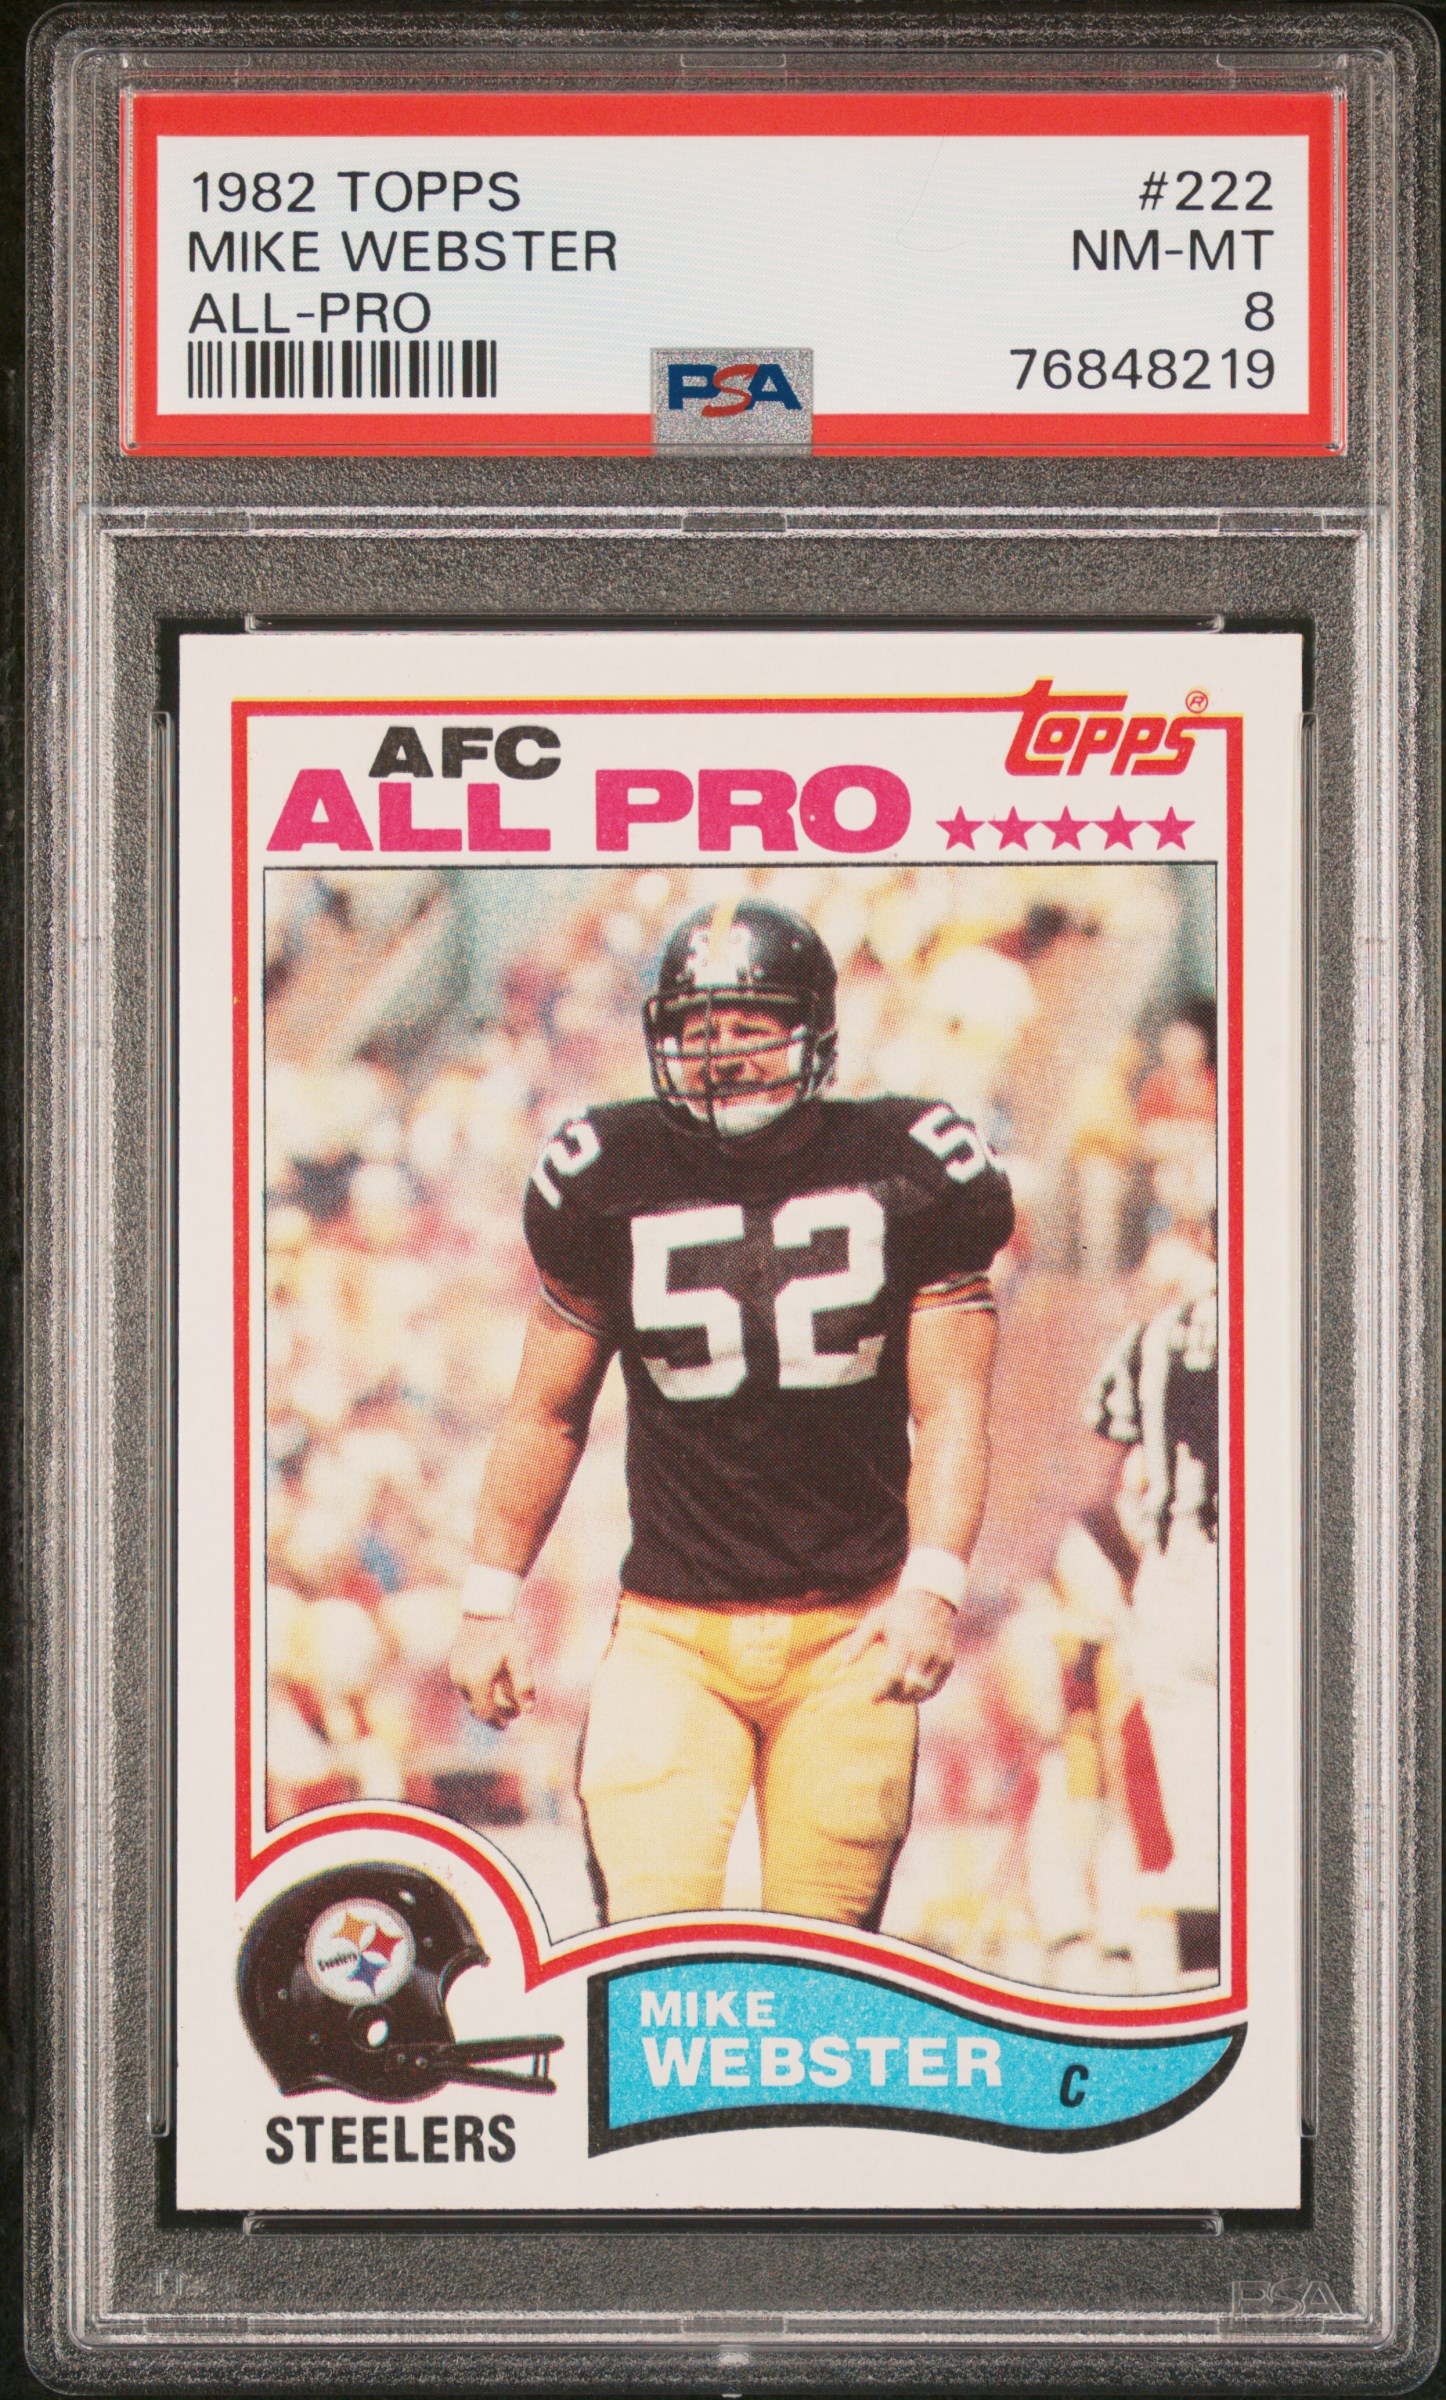 1982 Topps All-Pro #222 Mike Webster PSA 8